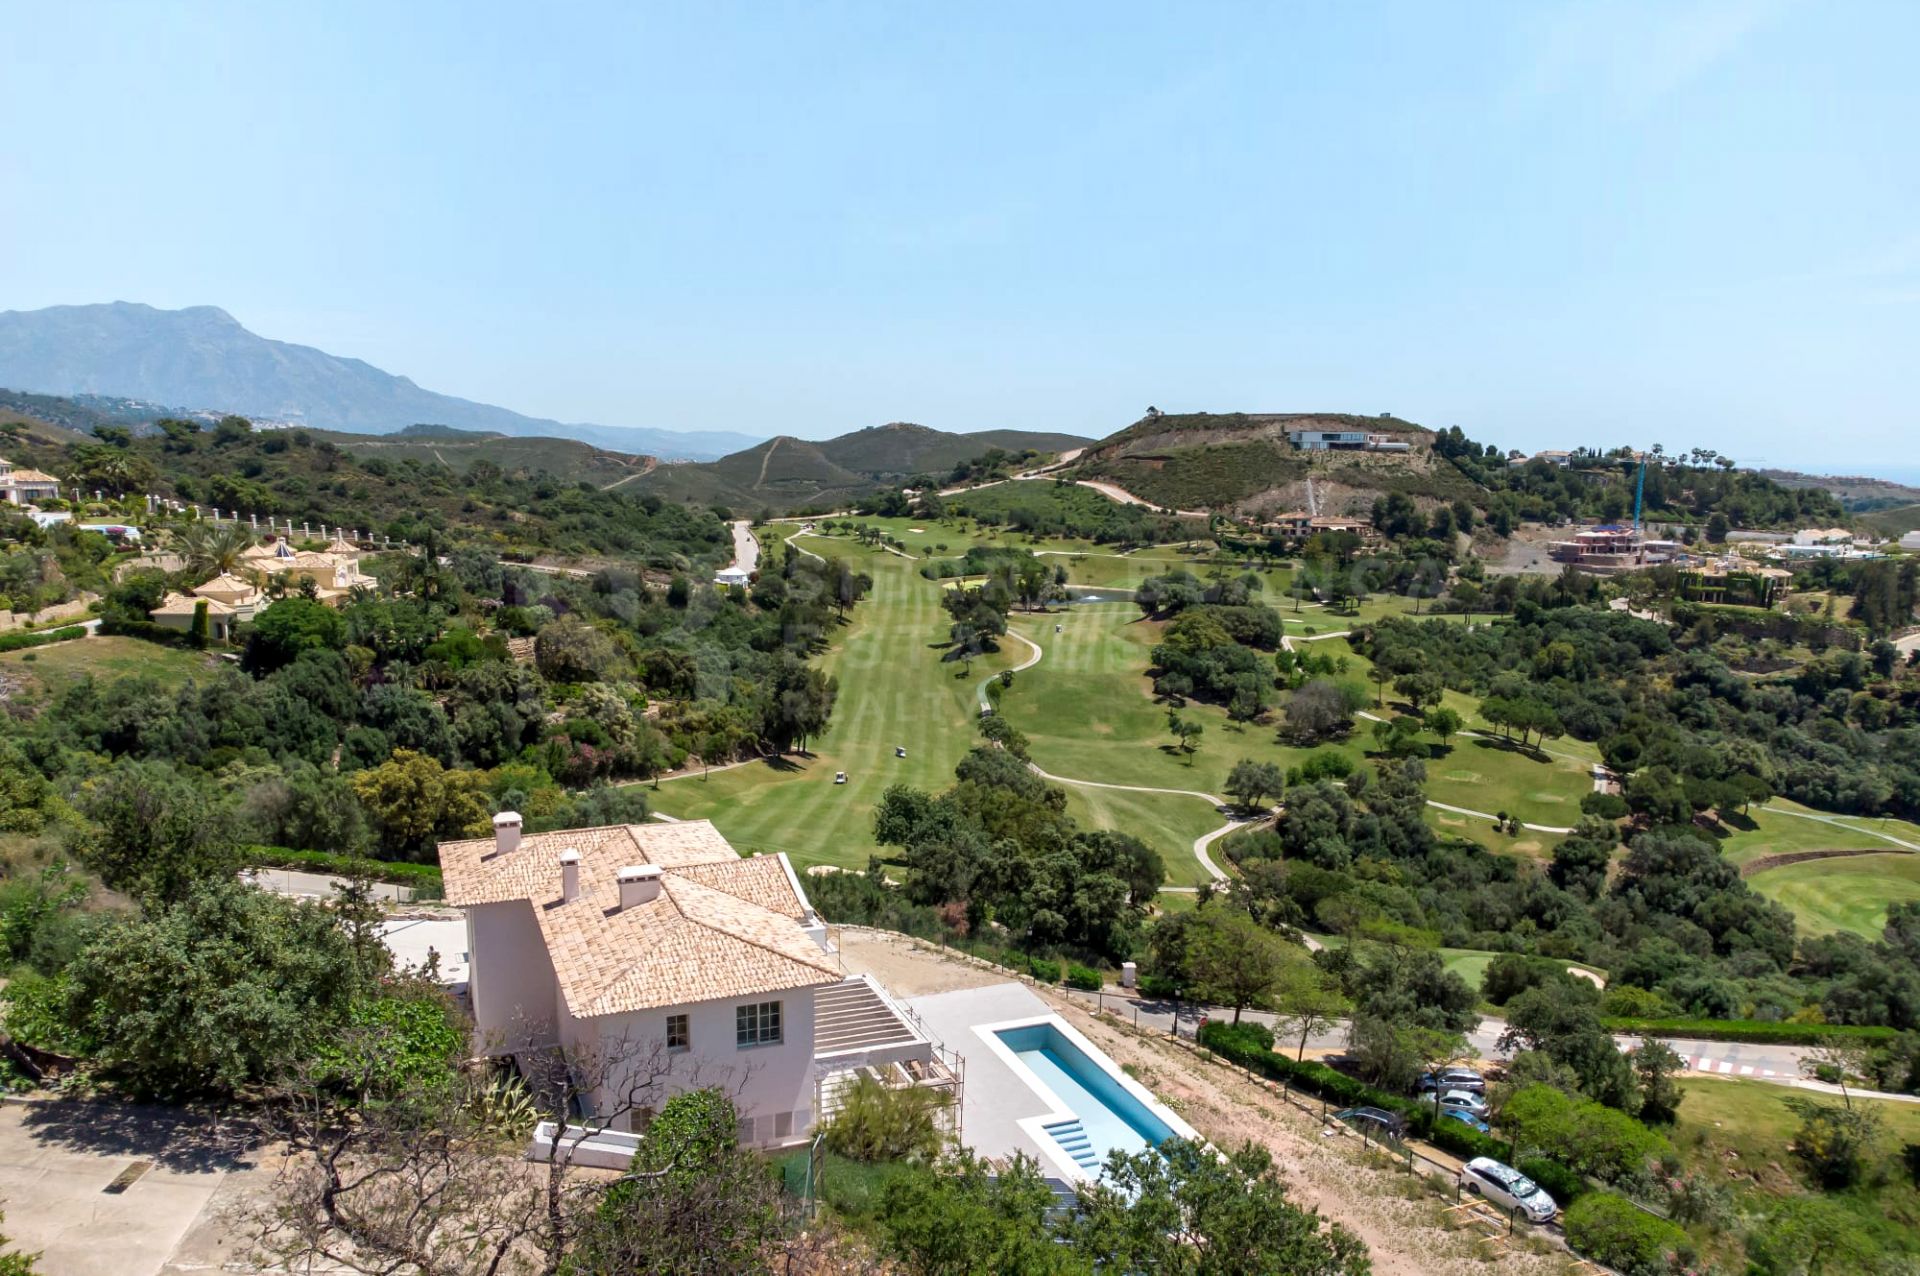 Villa in an exclusive location close to golf course